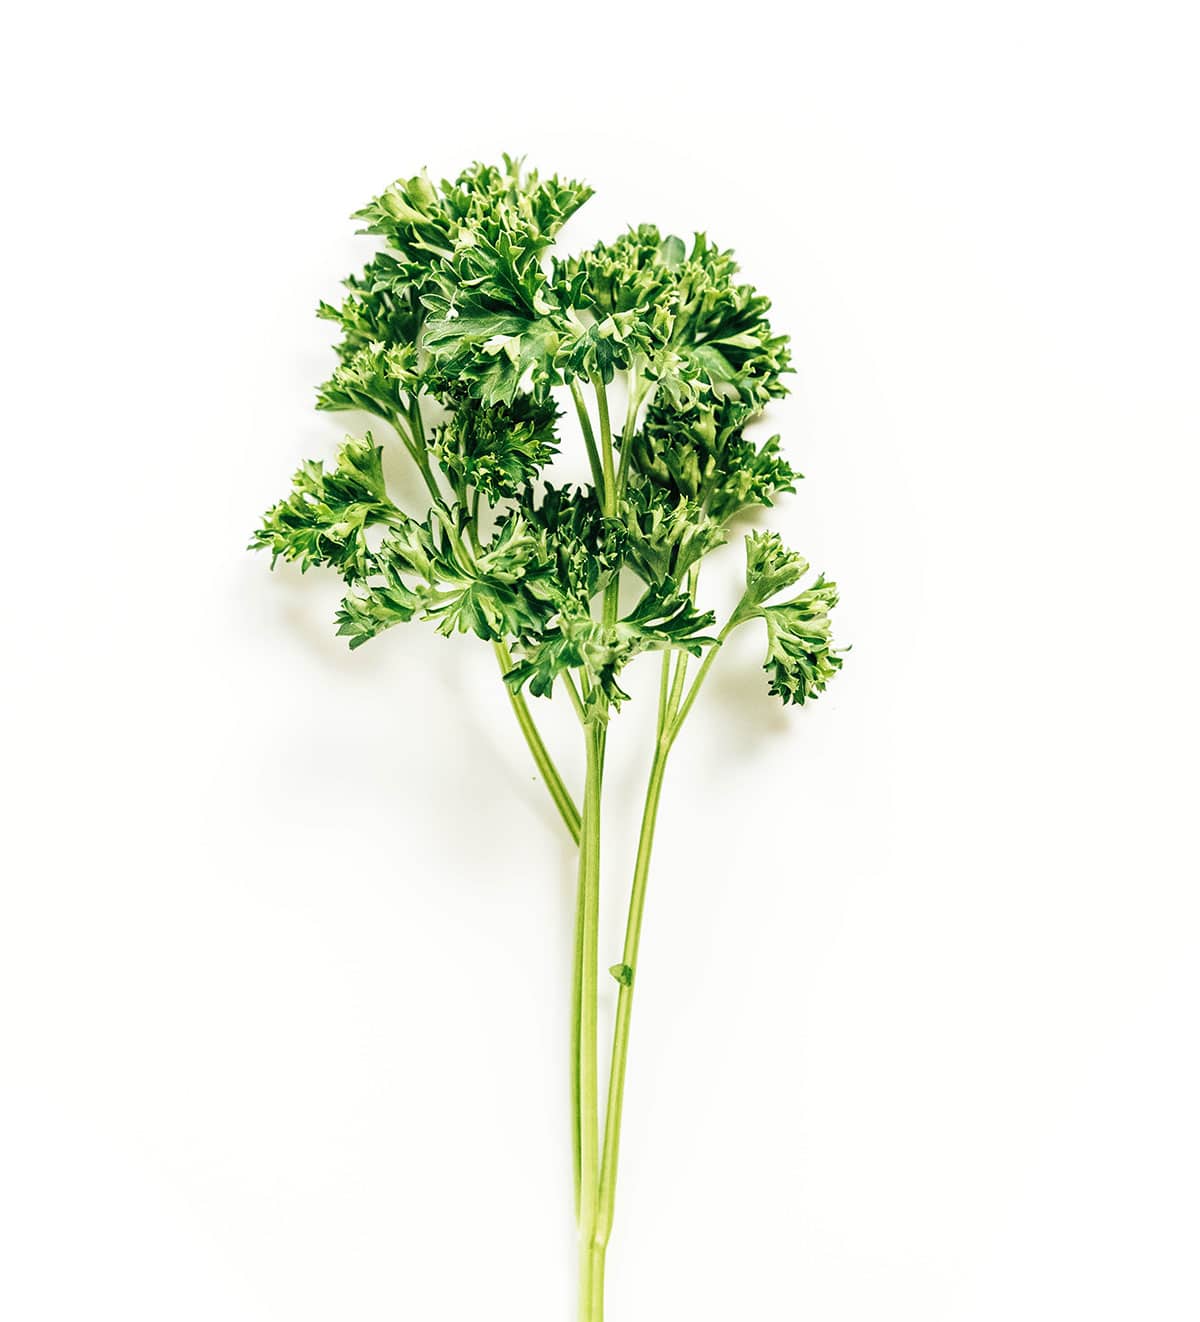 A bunch of curly parsley on a white background